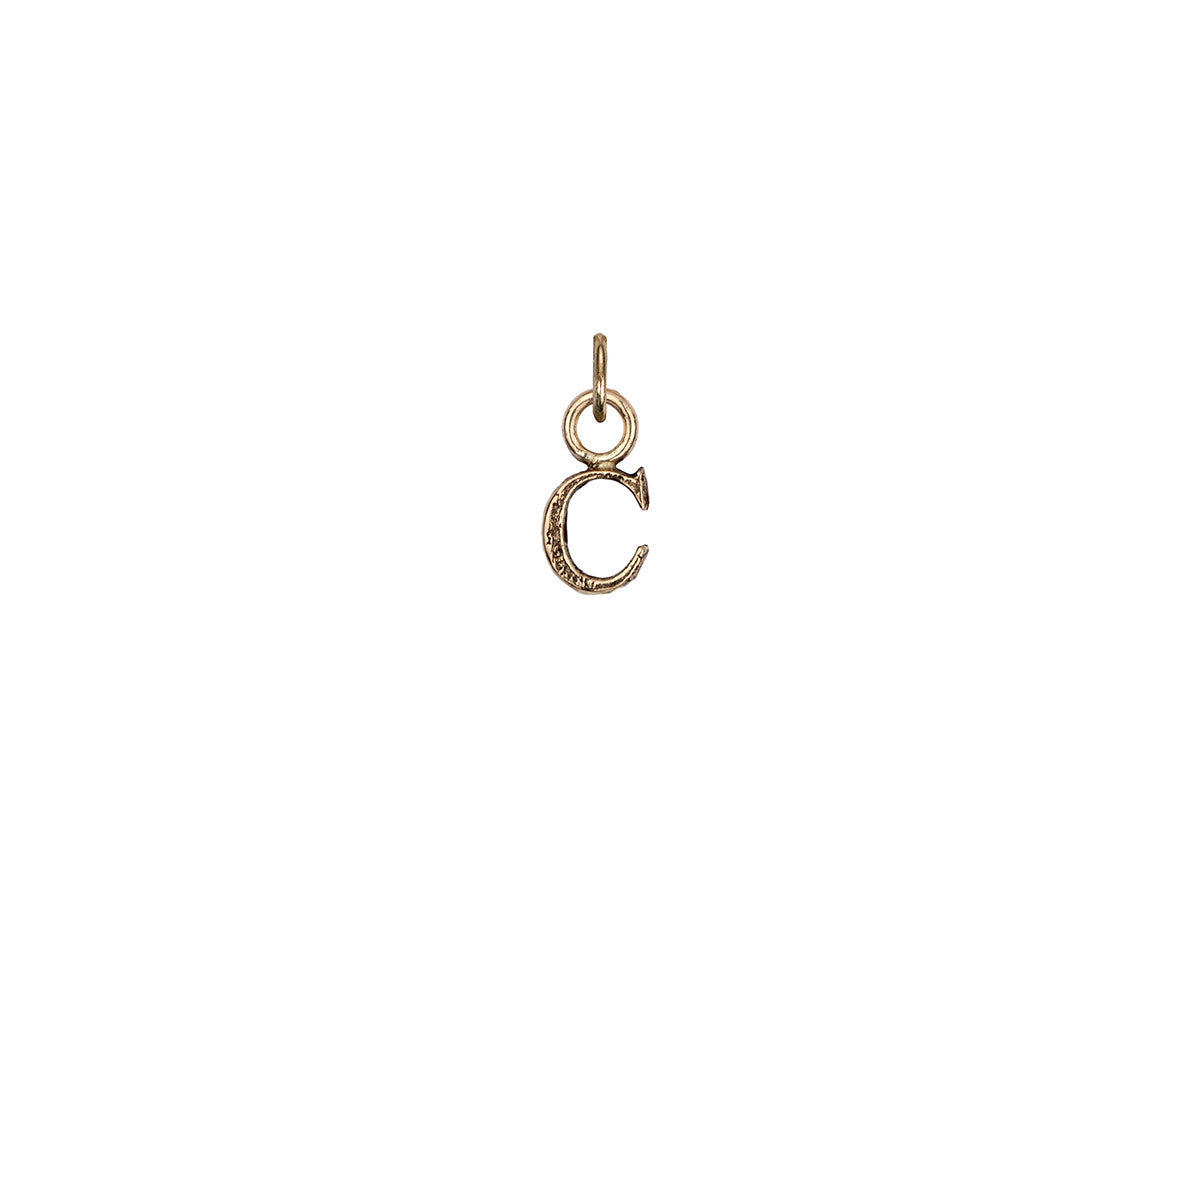 A 14k gold charm in the shape of the letter "C".